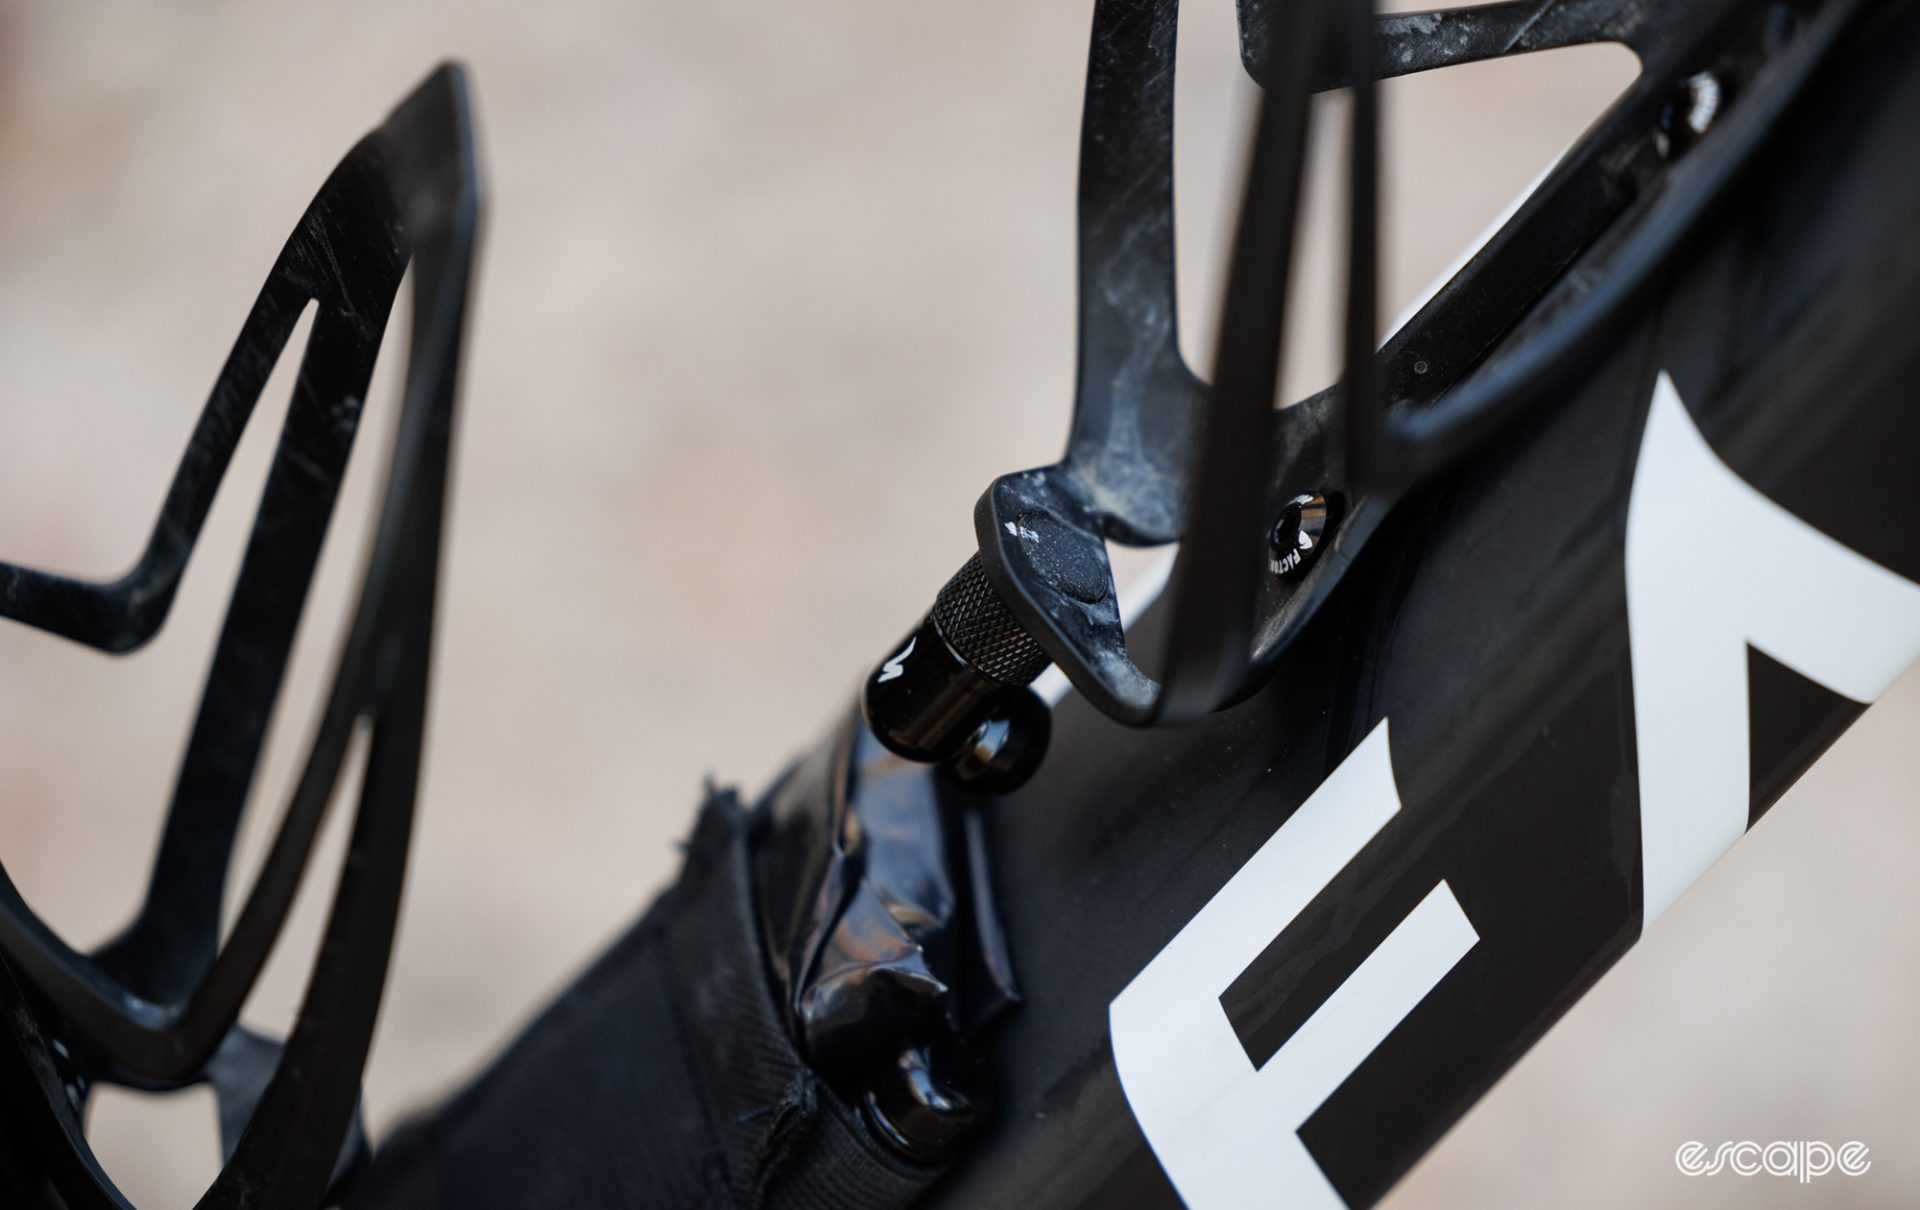 A custom 3D-printed accessory used to mount a Co2 inflator head to a bottle cage. 